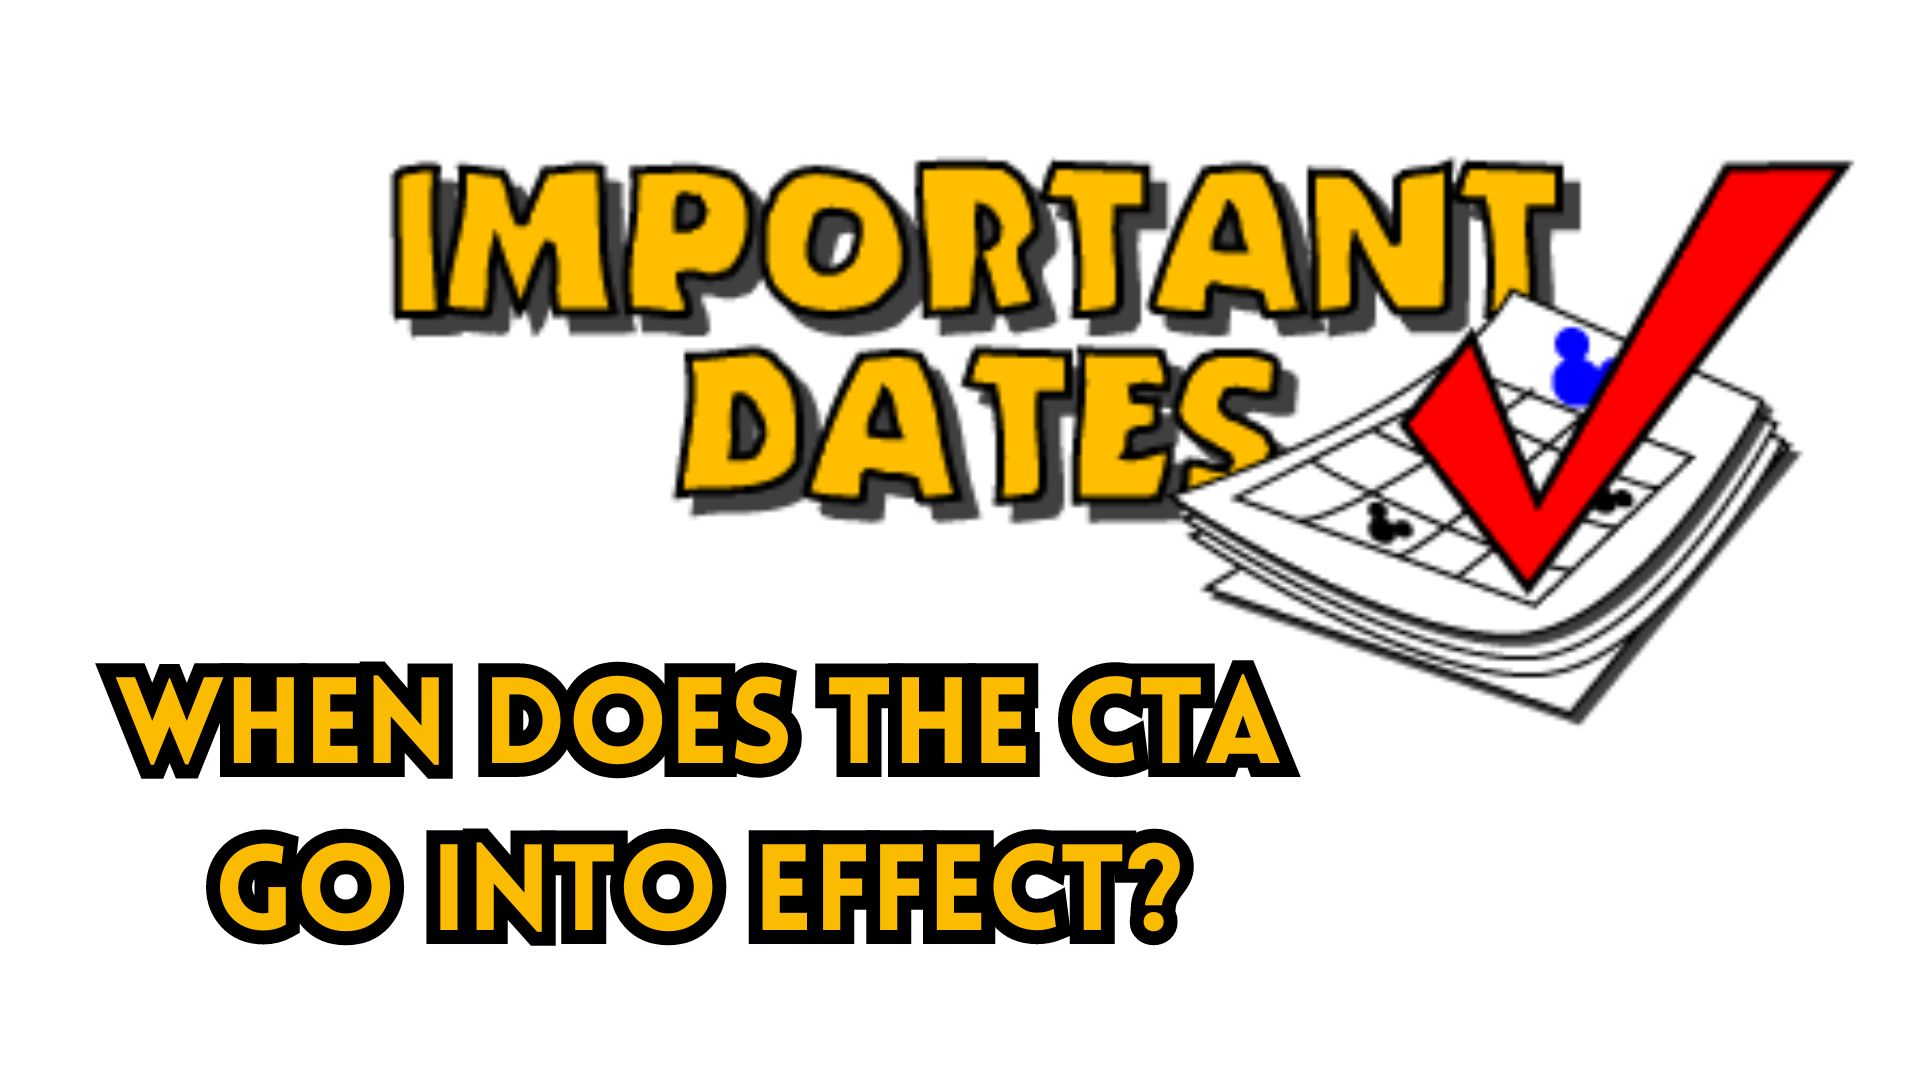 When Does the CTA Go into Effect?